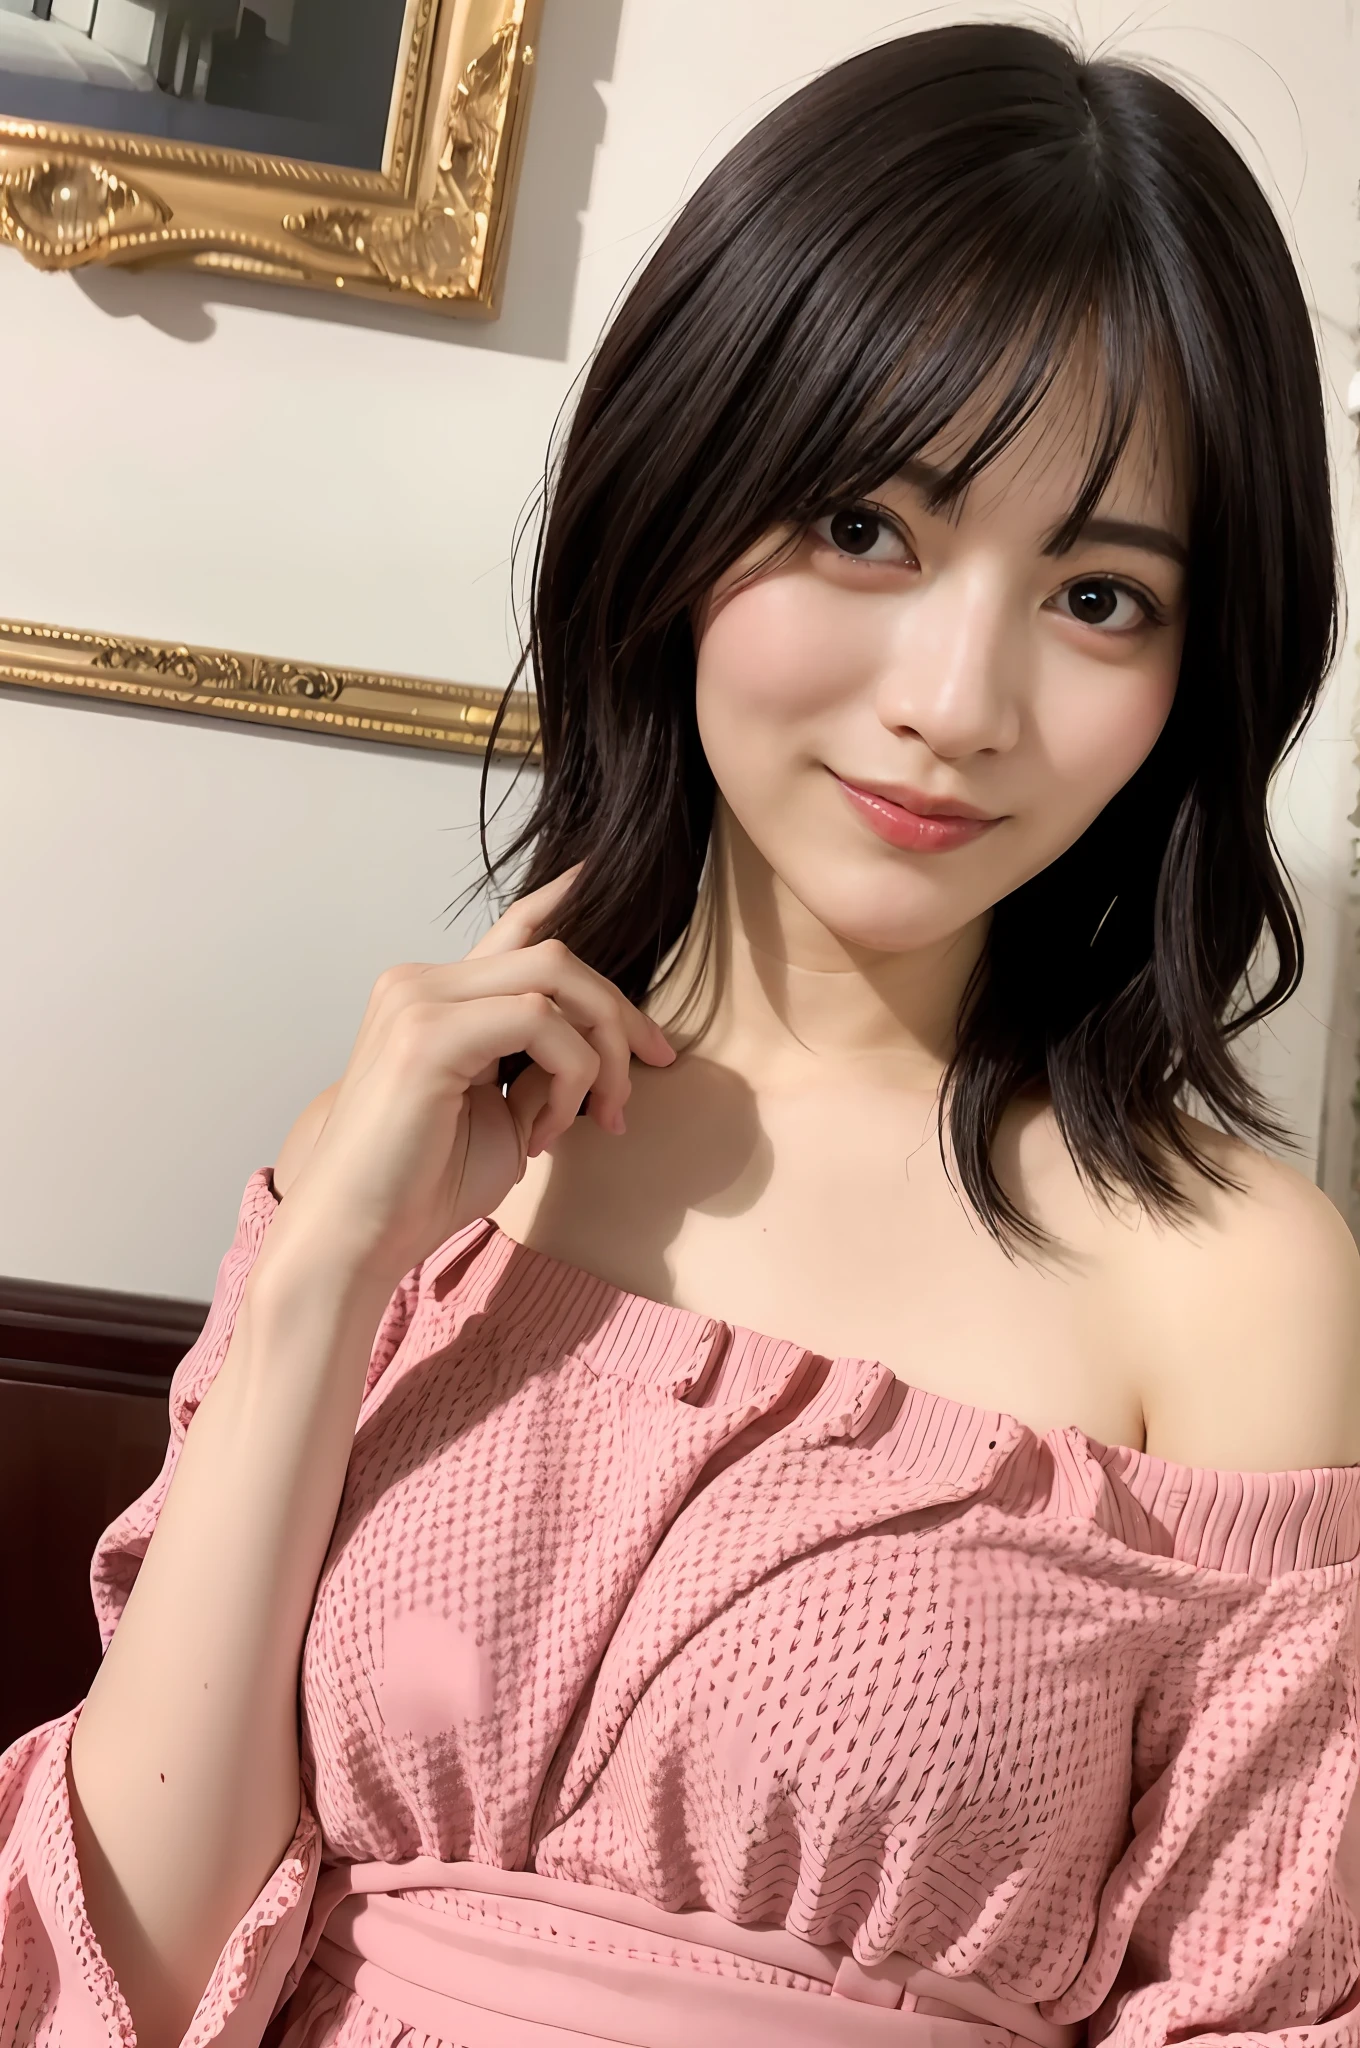 top-quality、Photorealsitic、8K、hight resolution、Perfect litthing、a gorgeous、​masterpiece、realisitic、closeup portrait、
1girl in、piercingeyes、off-the-shoulder sweater、middlebreasts、shorth hair、Look at viewers、kindly smile、in a cafe、in the room、a miniskirt